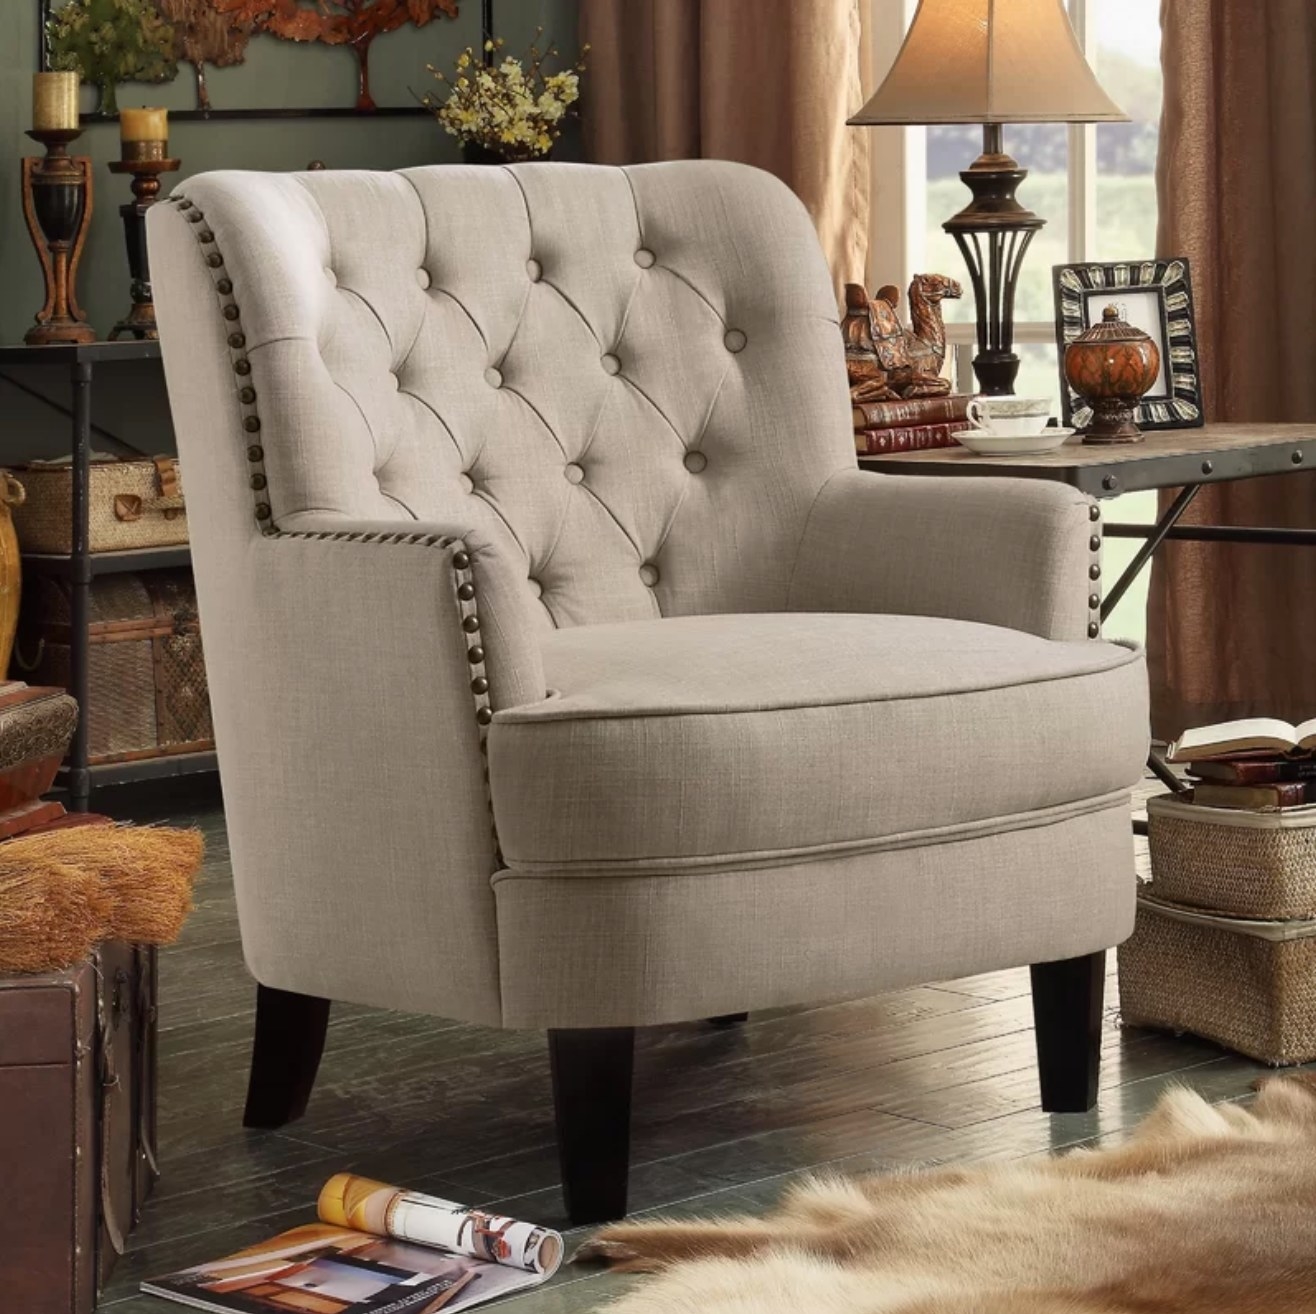 The wingback chair in beige linen situated in a living room with a fur rug